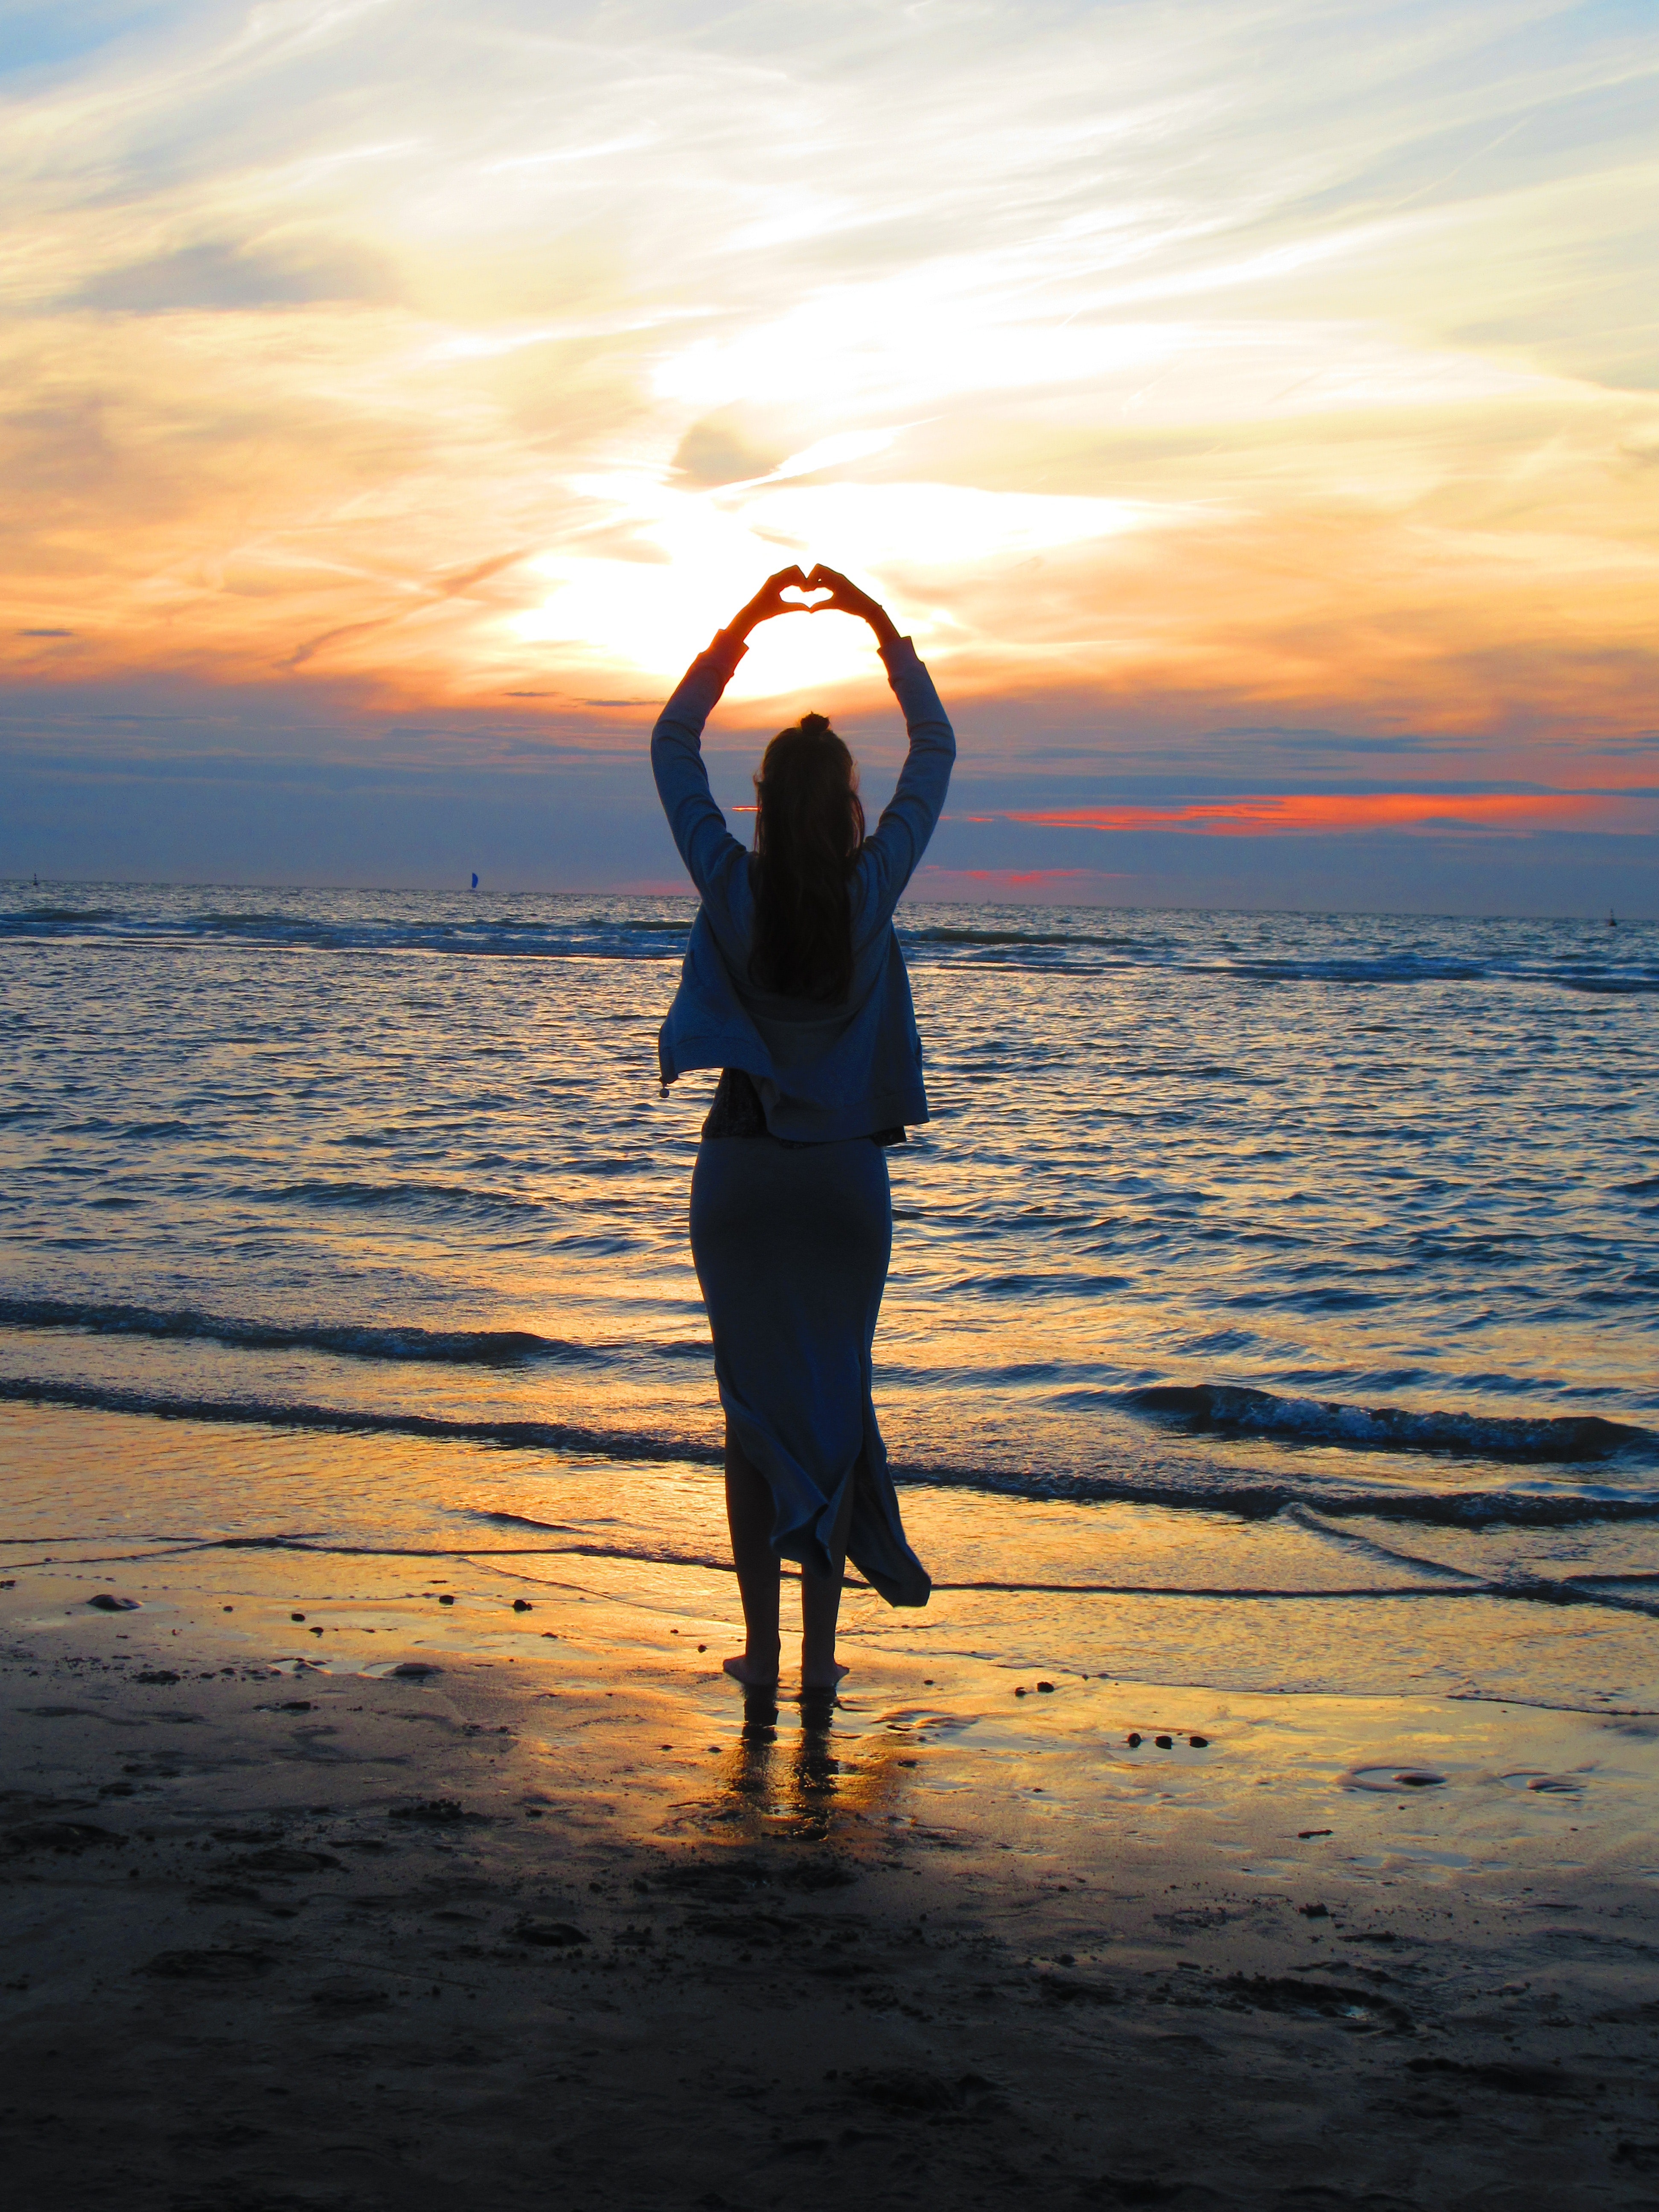 Woman With Arms Up Making Heart Sign While Standing on Beach at Sunset, Beach, Dawn, Dusk, Girl, HQ Photo